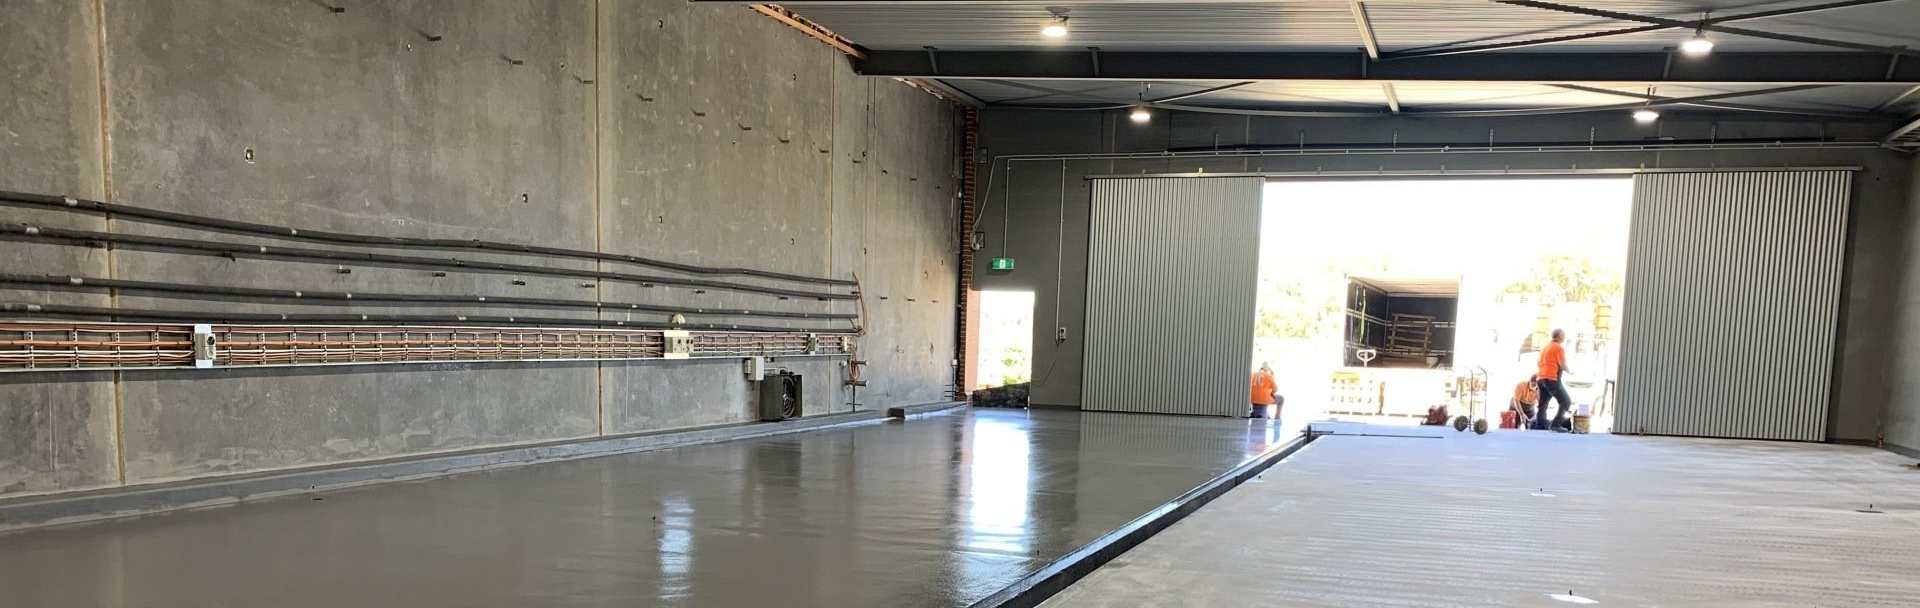 Alltype Specialised Coating Pty Ltd Concrete Reinforcing